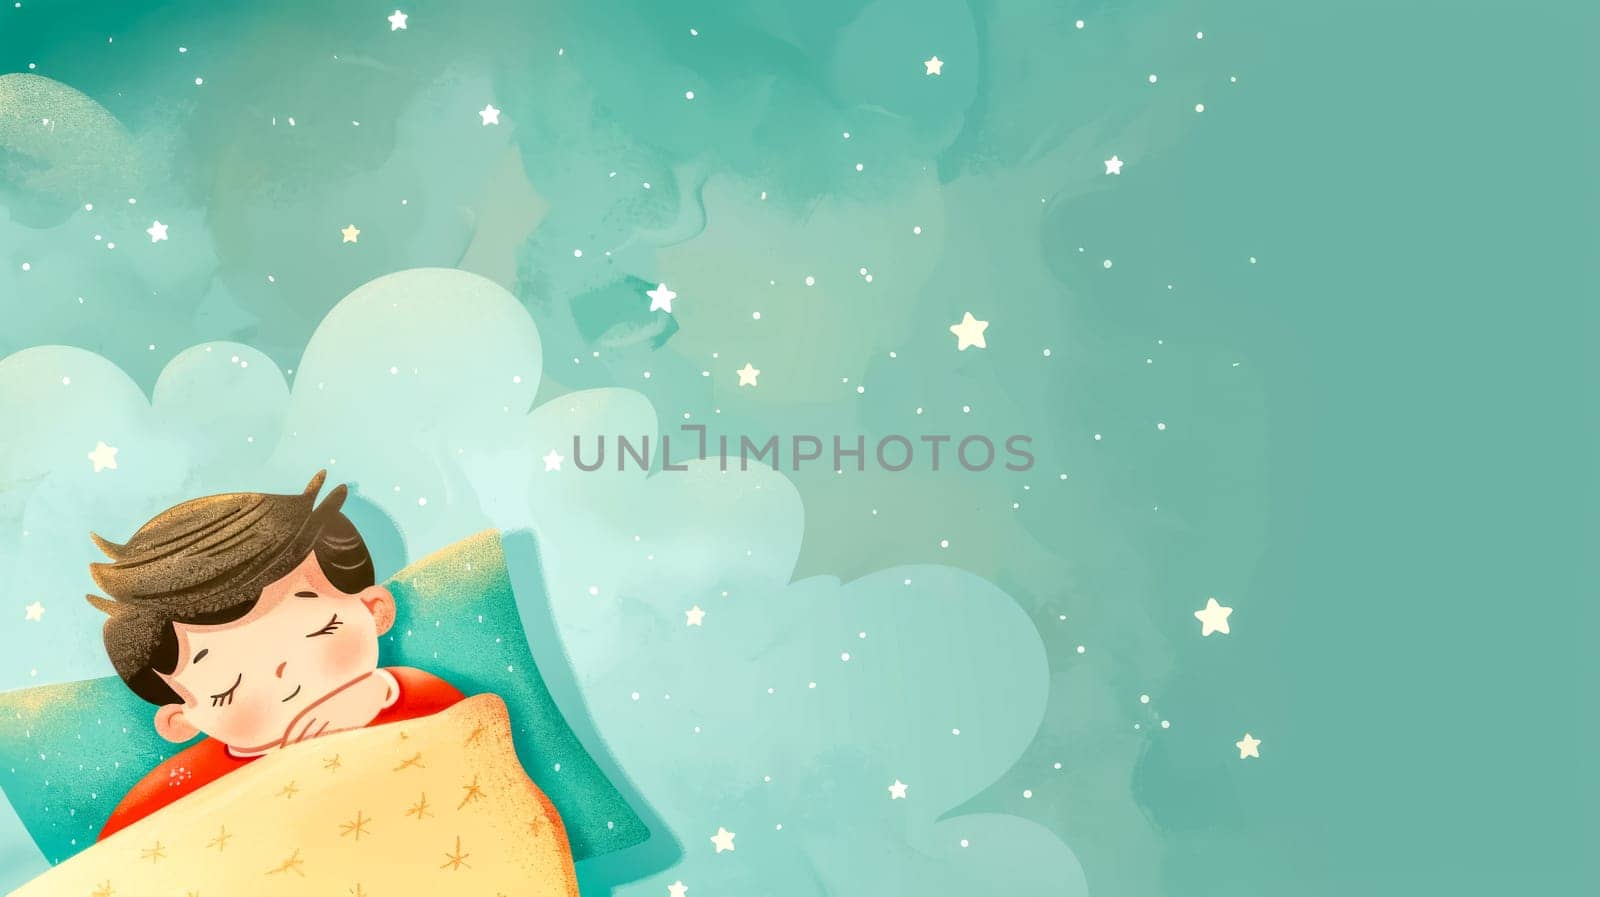 Illustrated image of a young boy sleeping soundly with whimsical stars and clouds background